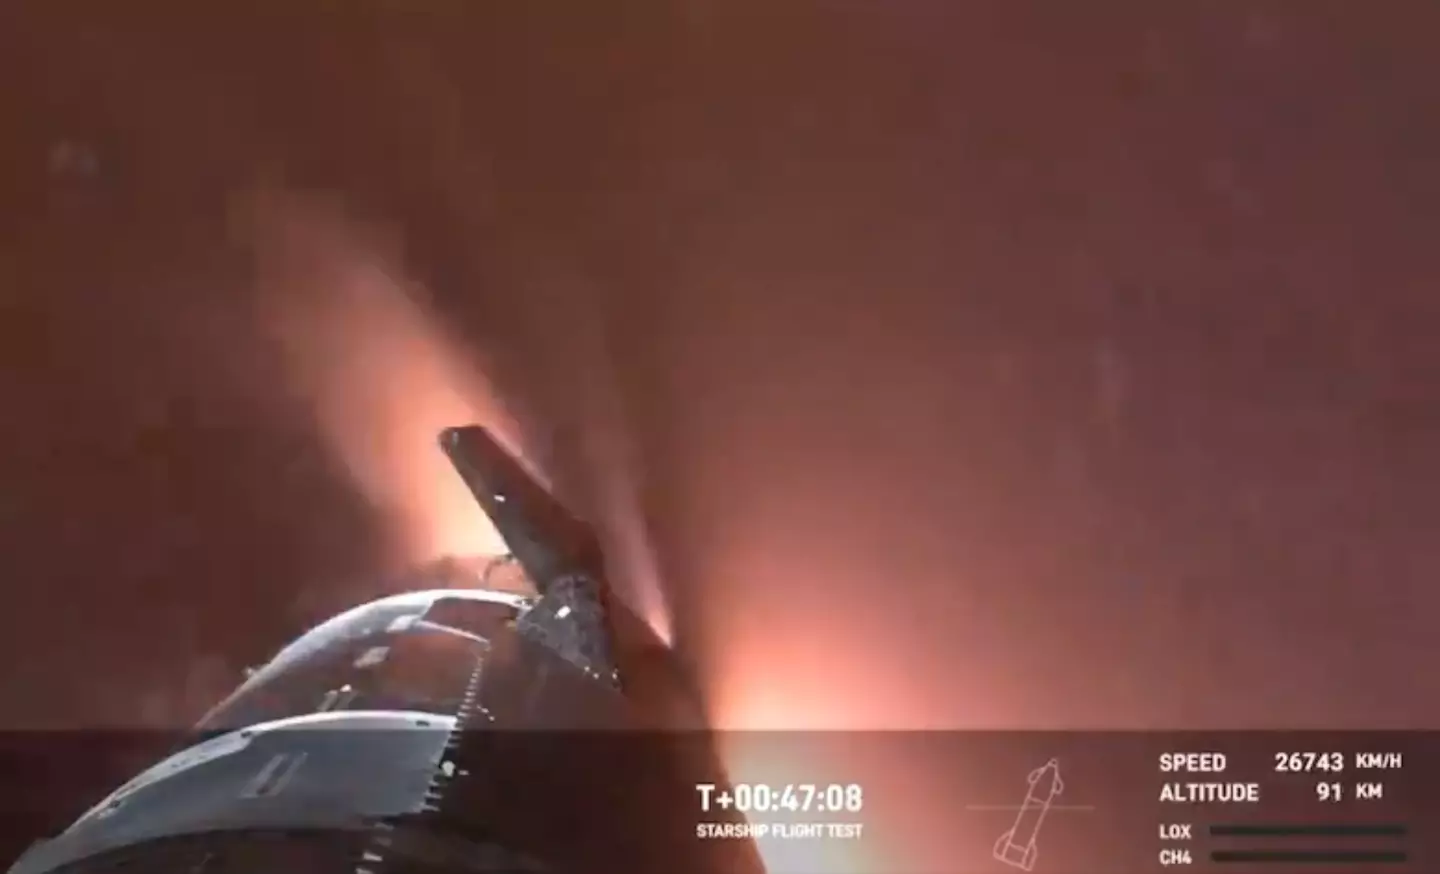 The video shows a hot plasma field around the rocket grow in an impressive display.